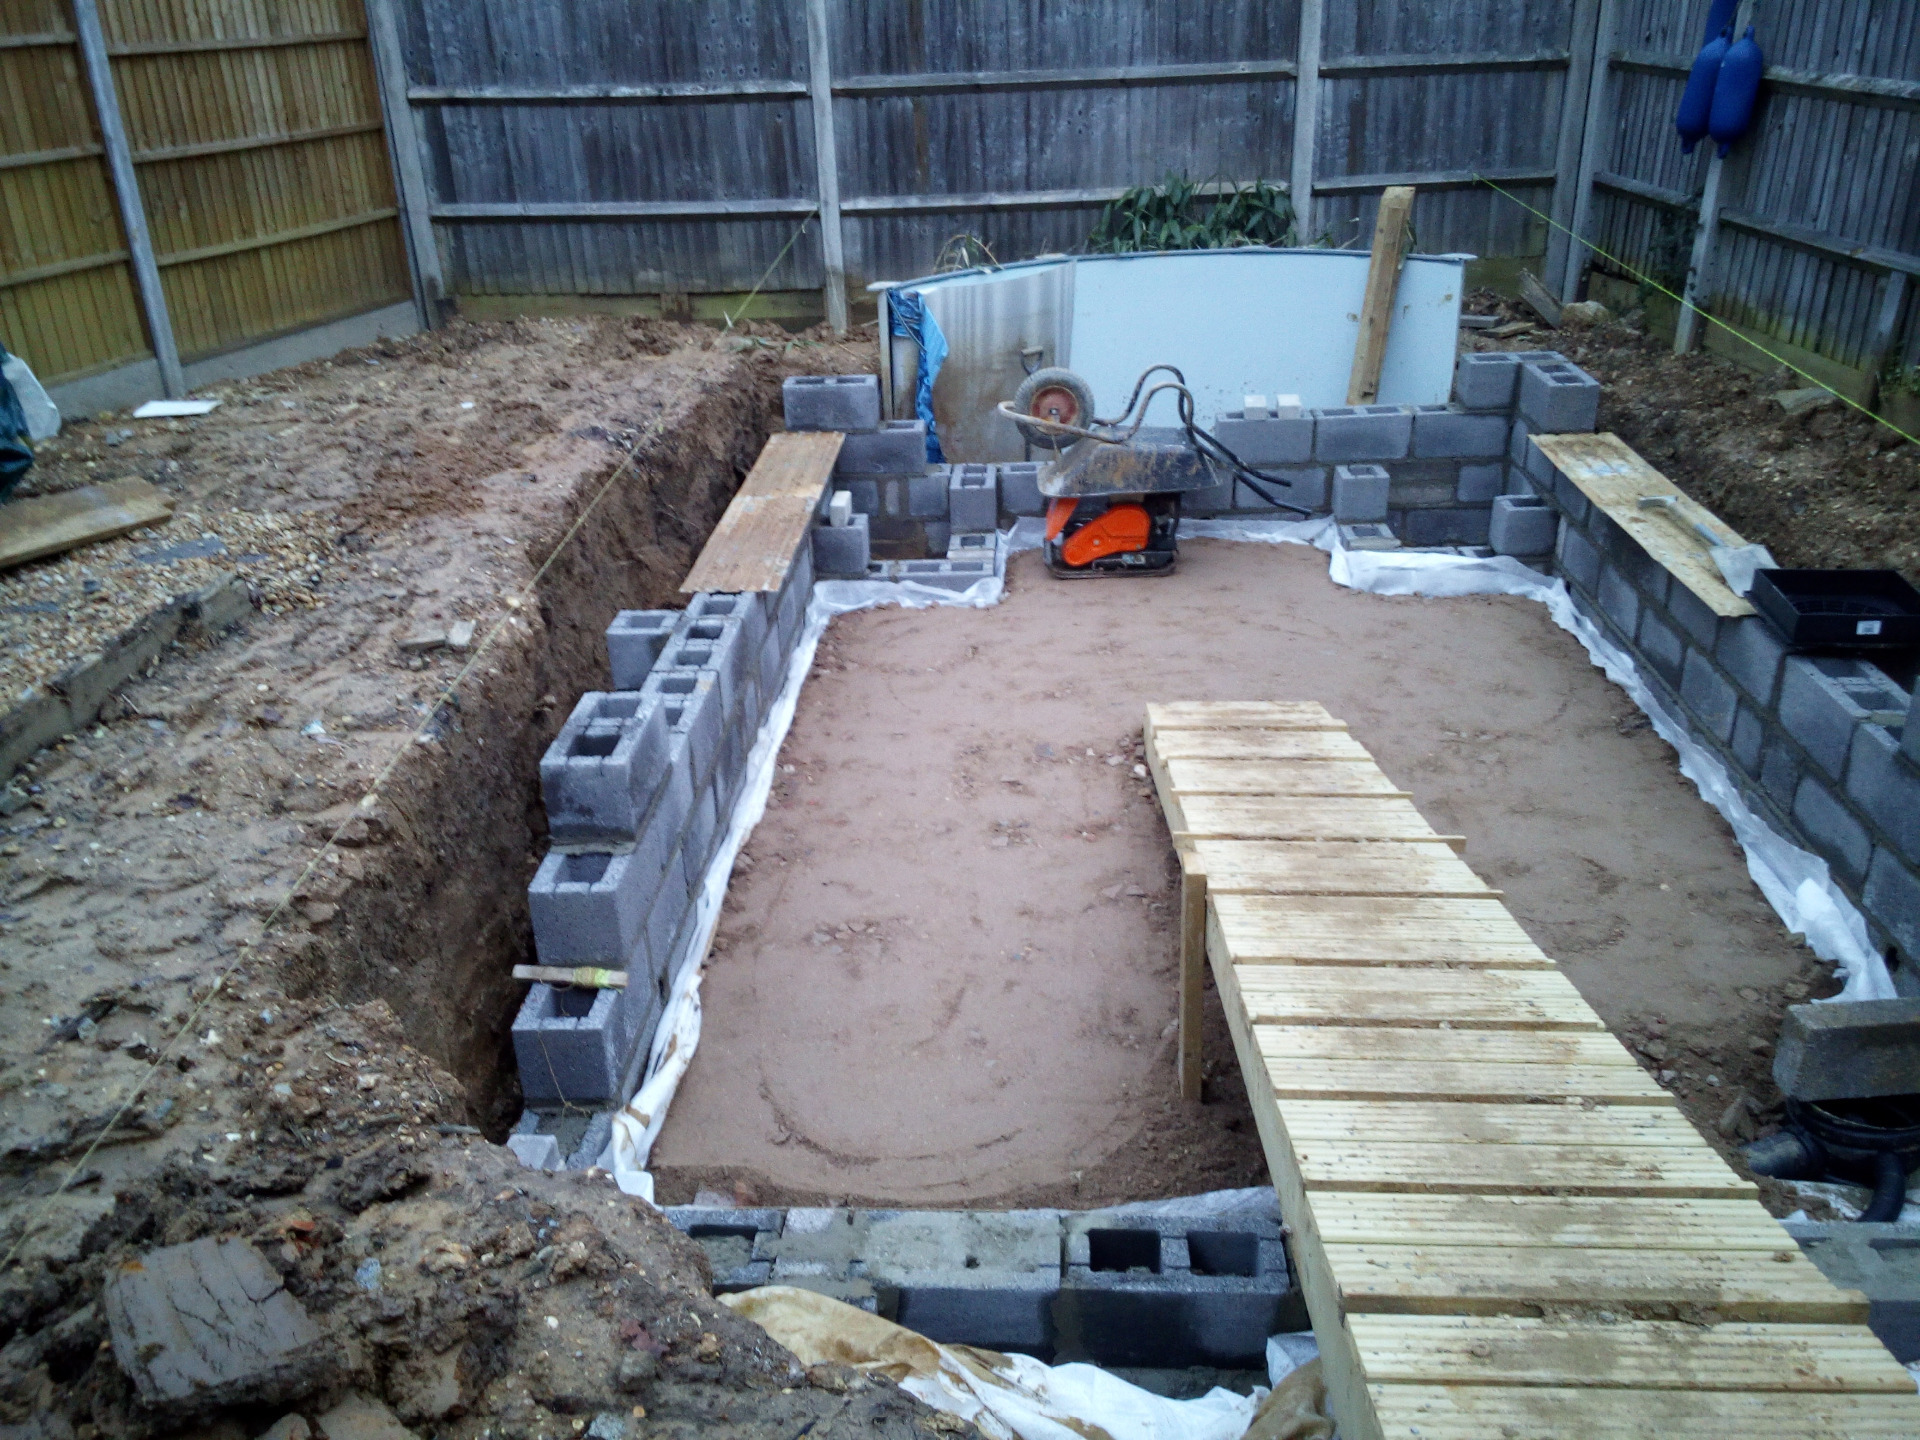 Complete garden makeover in Whiteley with paving, retaining walls, Sunken garden, artificial grass, fencing and planting